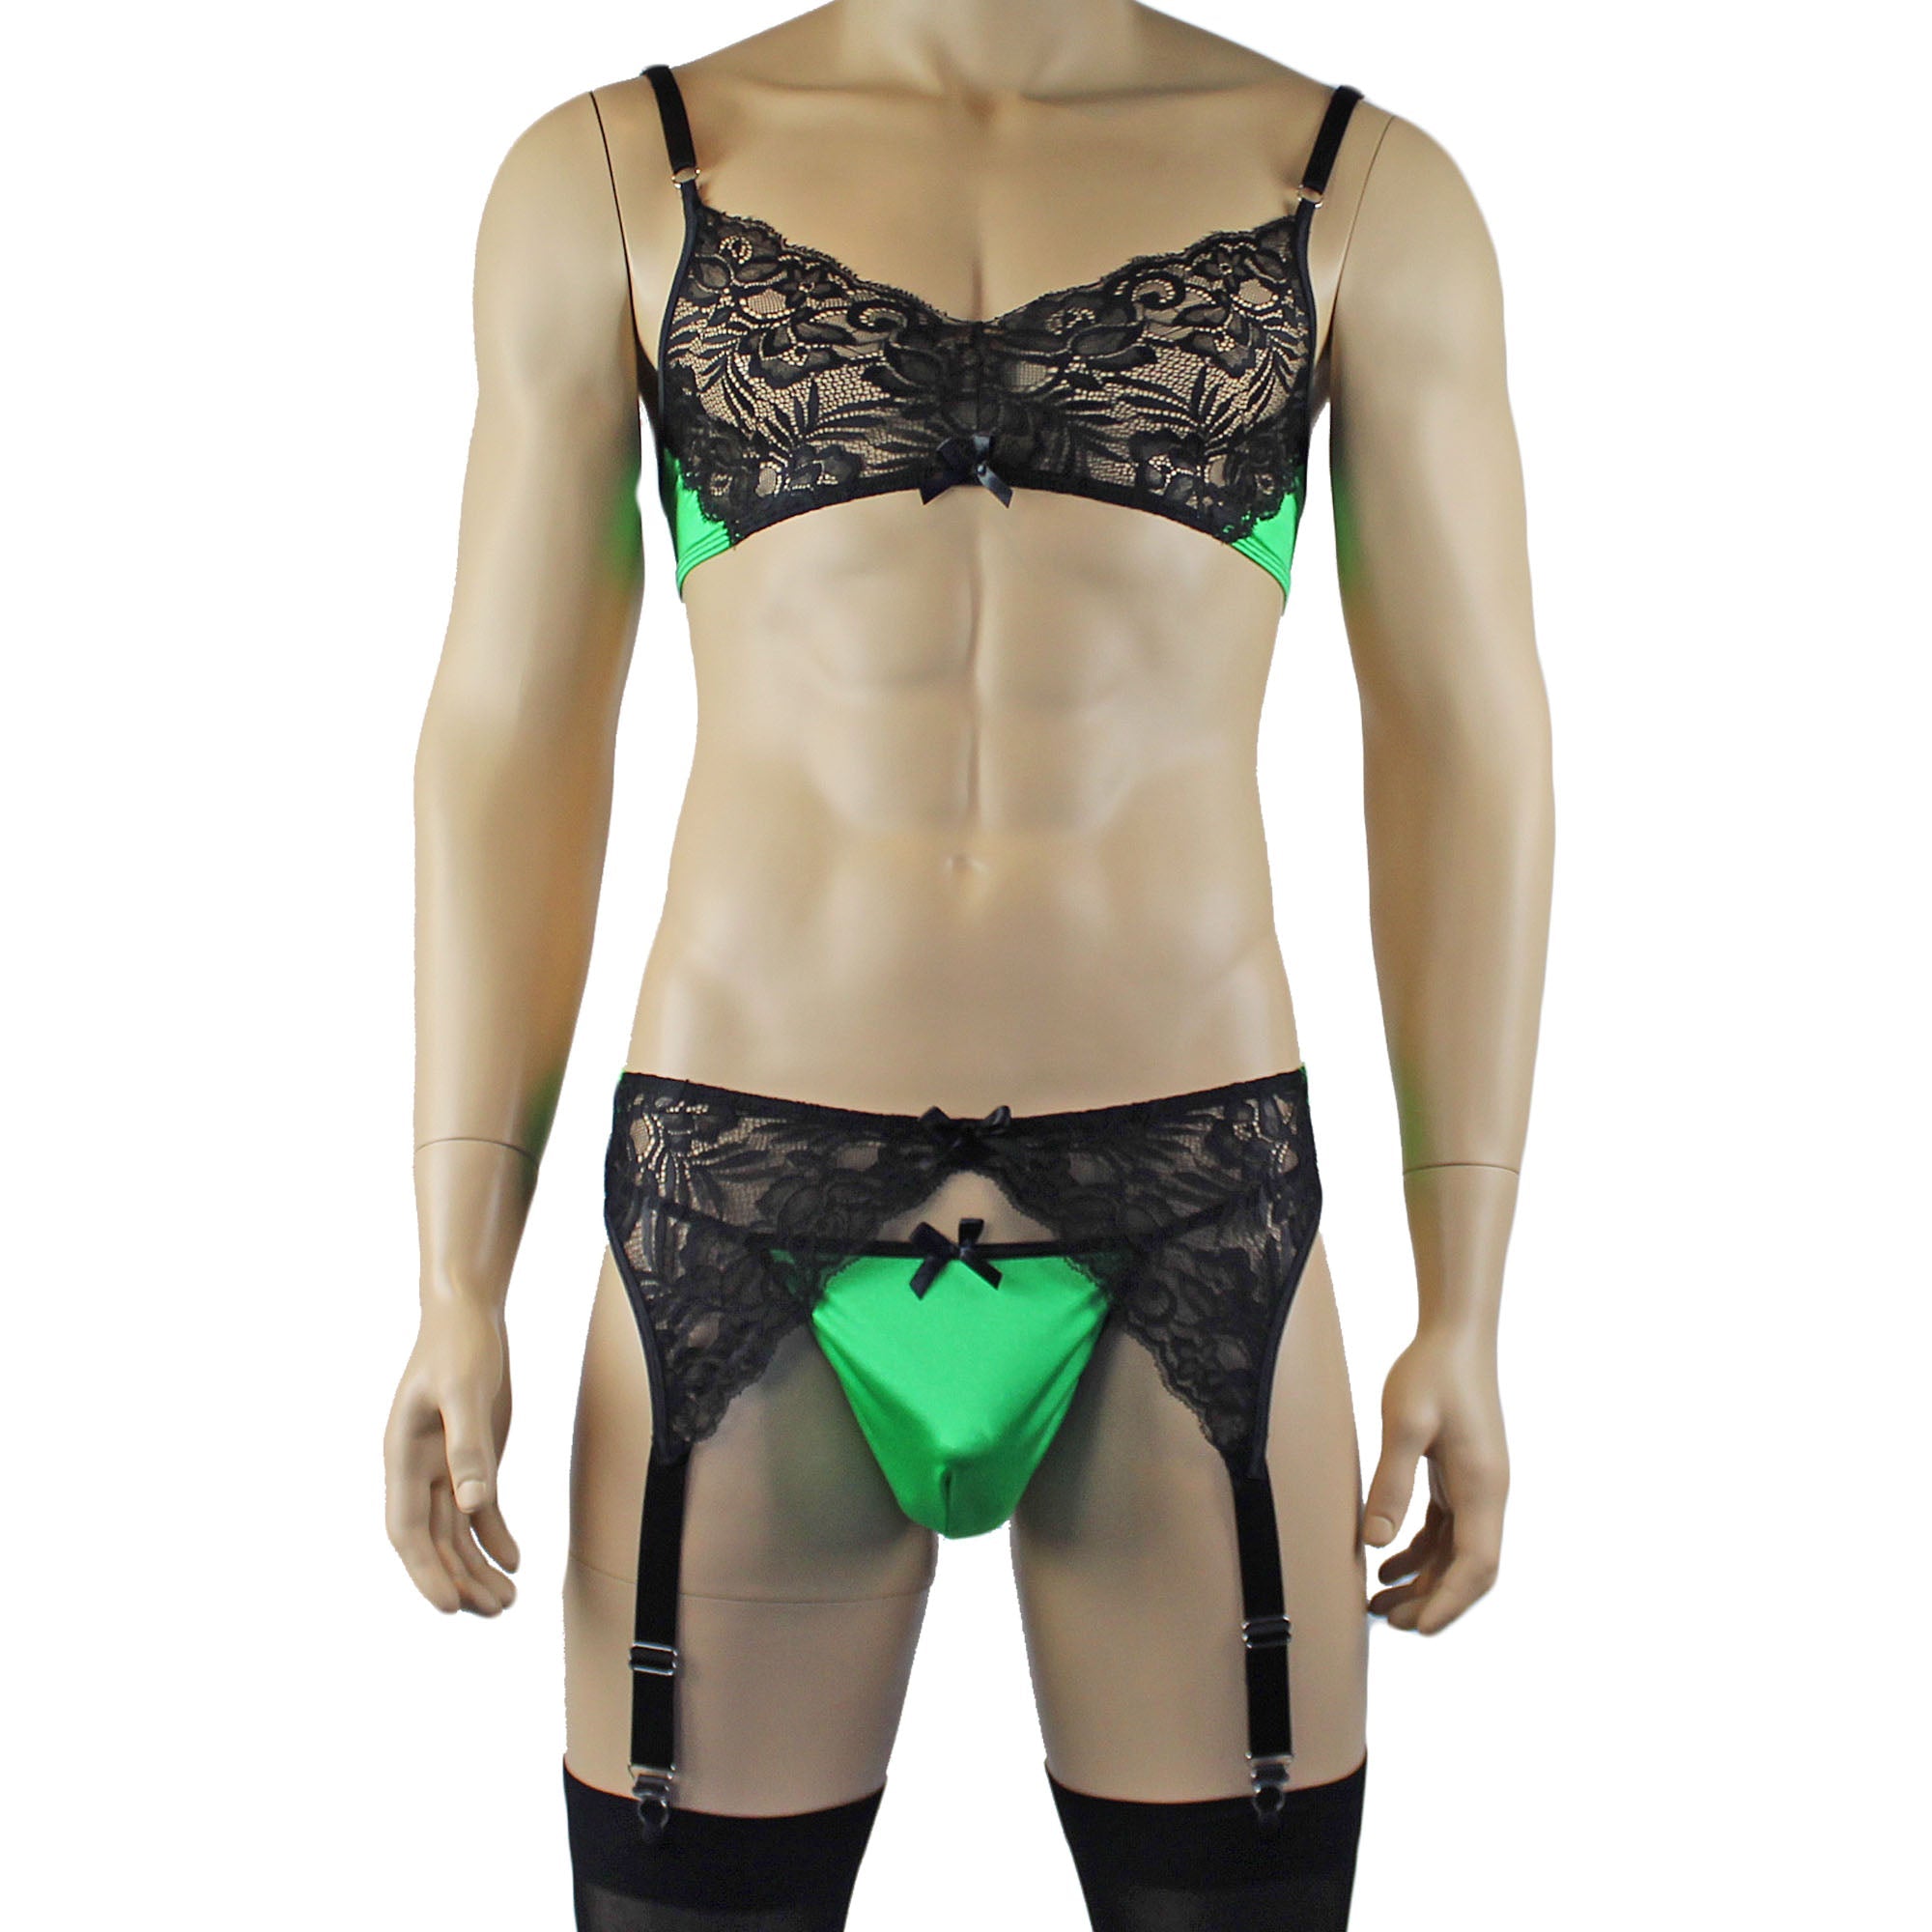 Mens Risque Bra Top, G string and Garterbelt Green and Black Lace